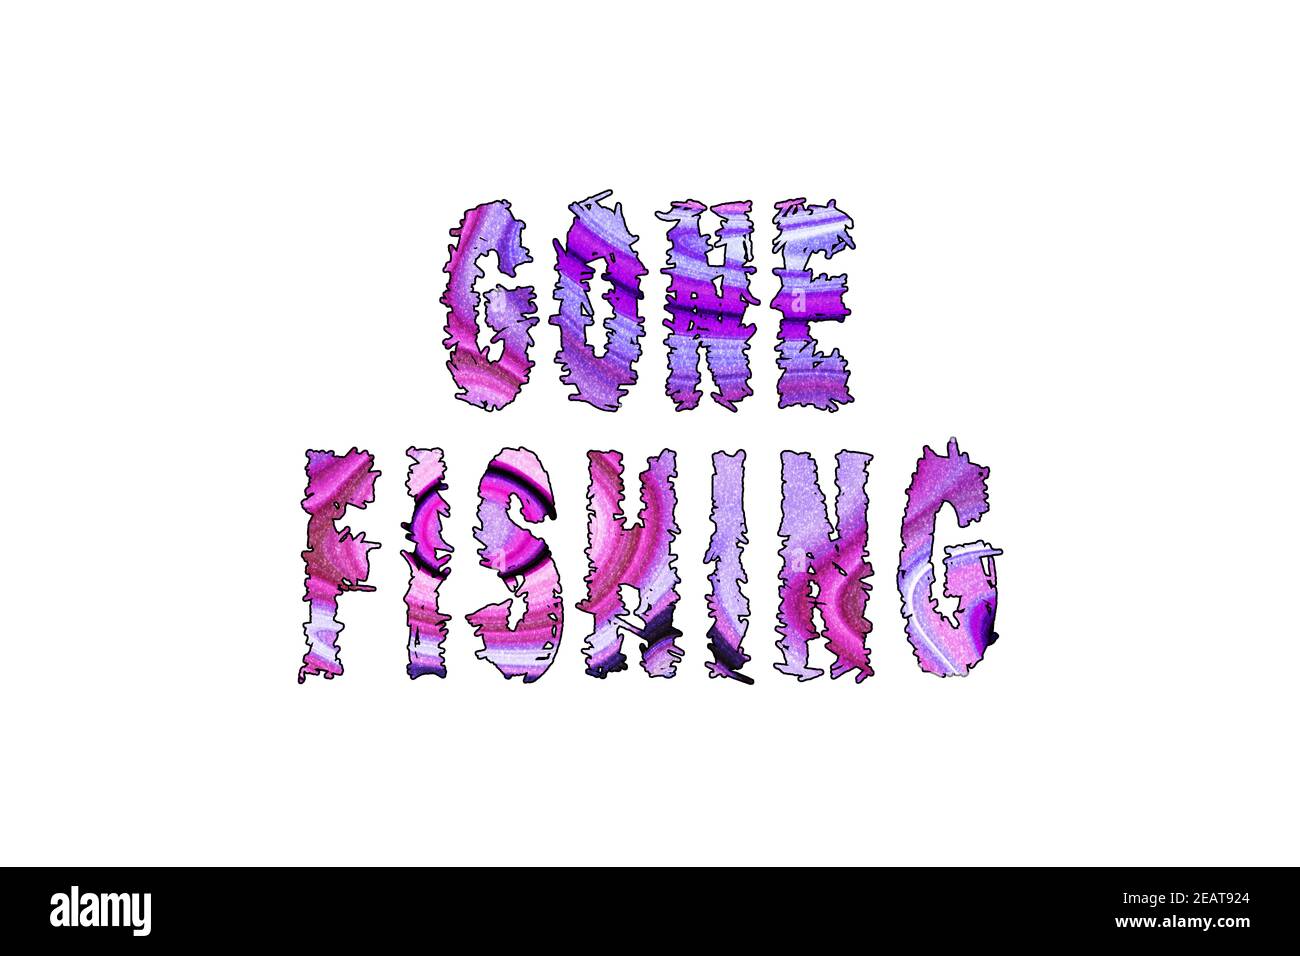 https://c8.alamy.com/comp/2EAT924/gone-fishing-banner-poster-and-sticker-with-clipping-path-2EAT924.jpg